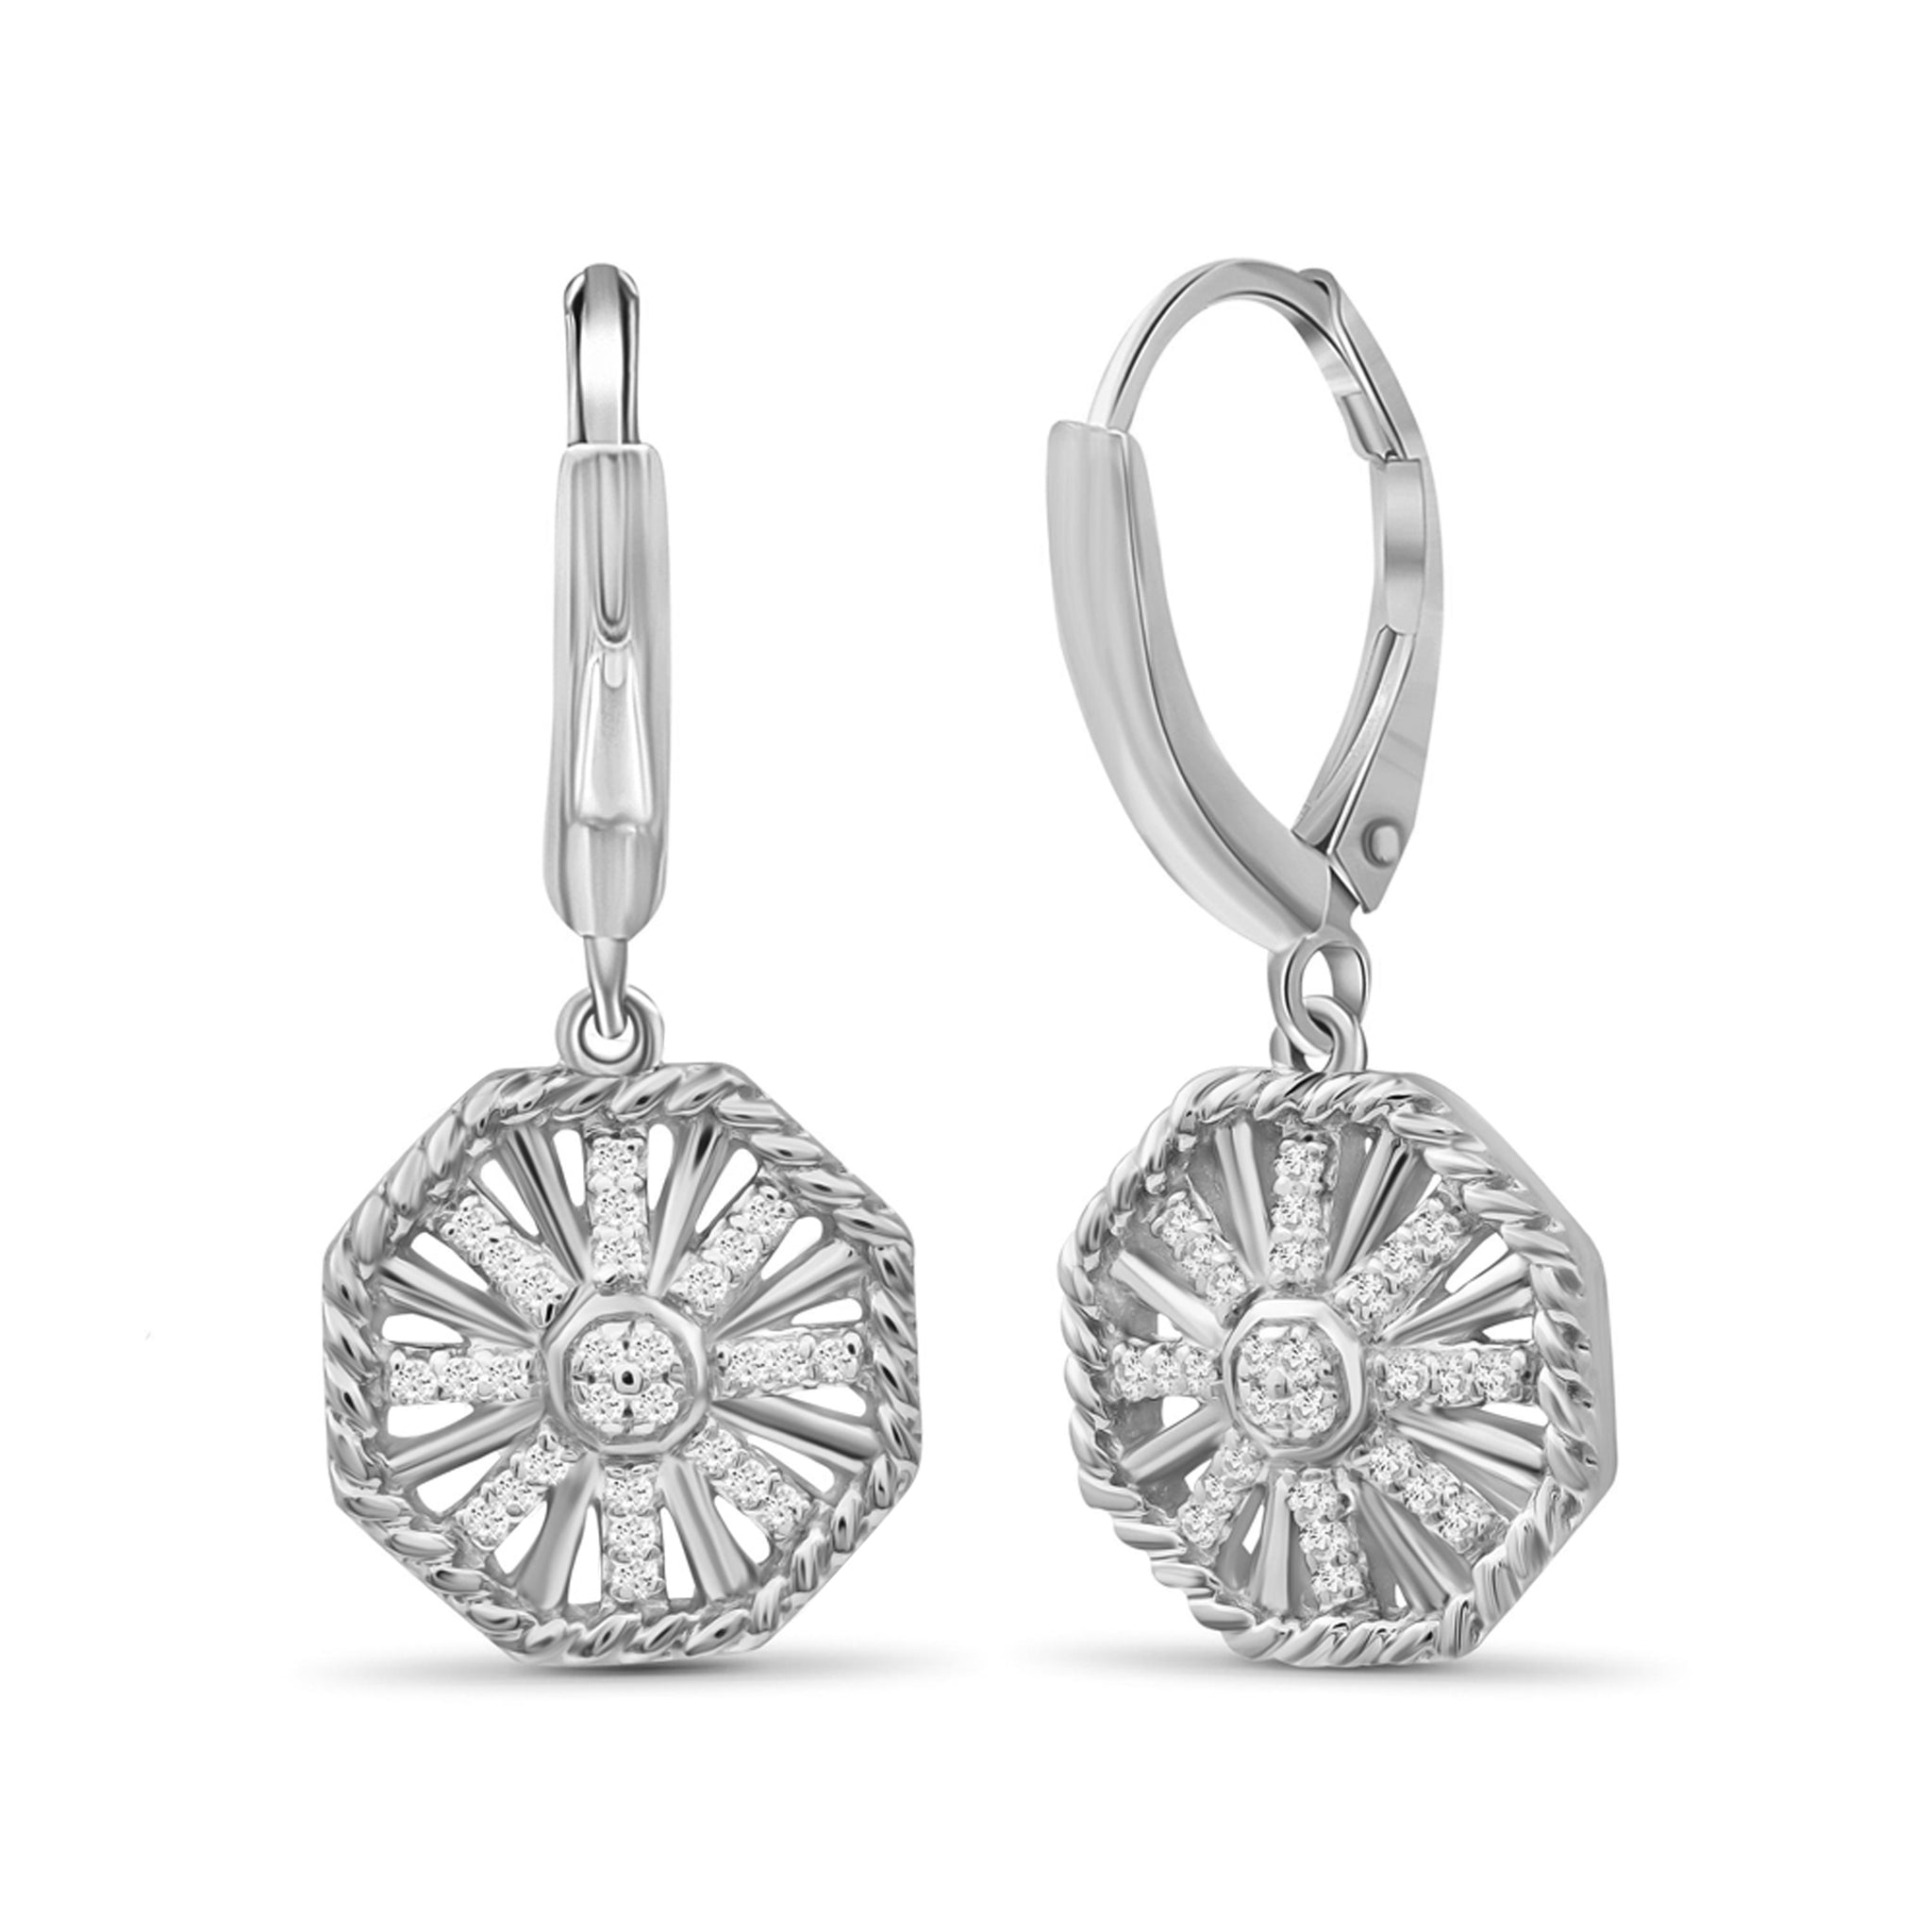 JewelonFire 1/3 Carat T.W. White Diamond Sterling Silver Octagon Earrings - Assorted Colors